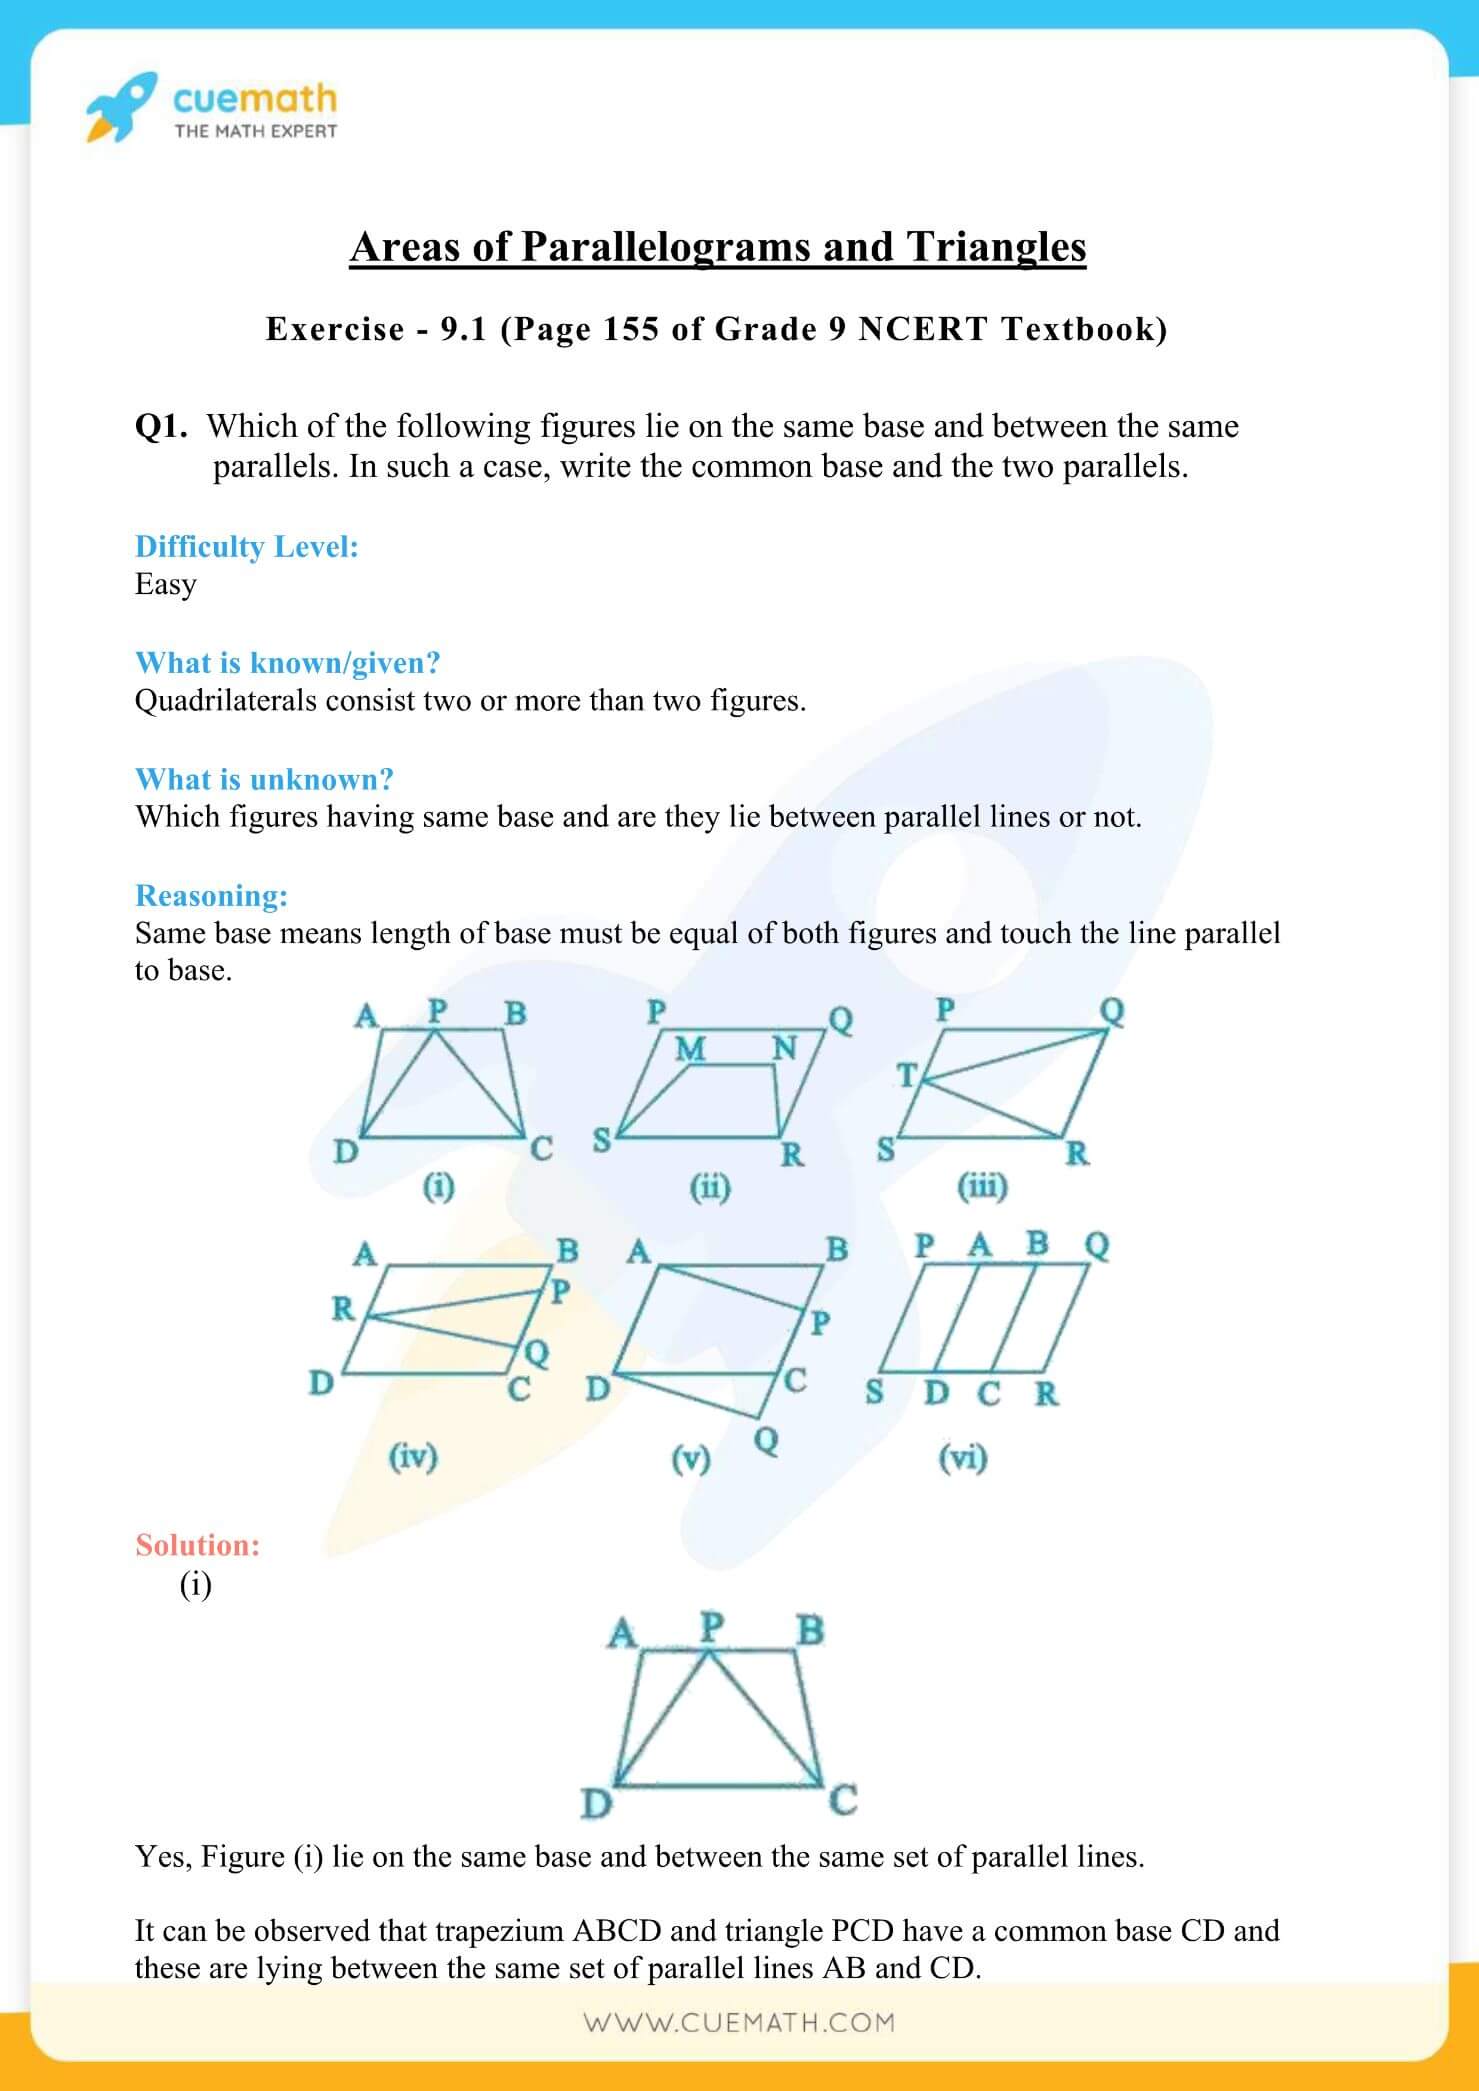 NCERT Solutions Class 9 Math Chapter 9 Exercise 9.1 1